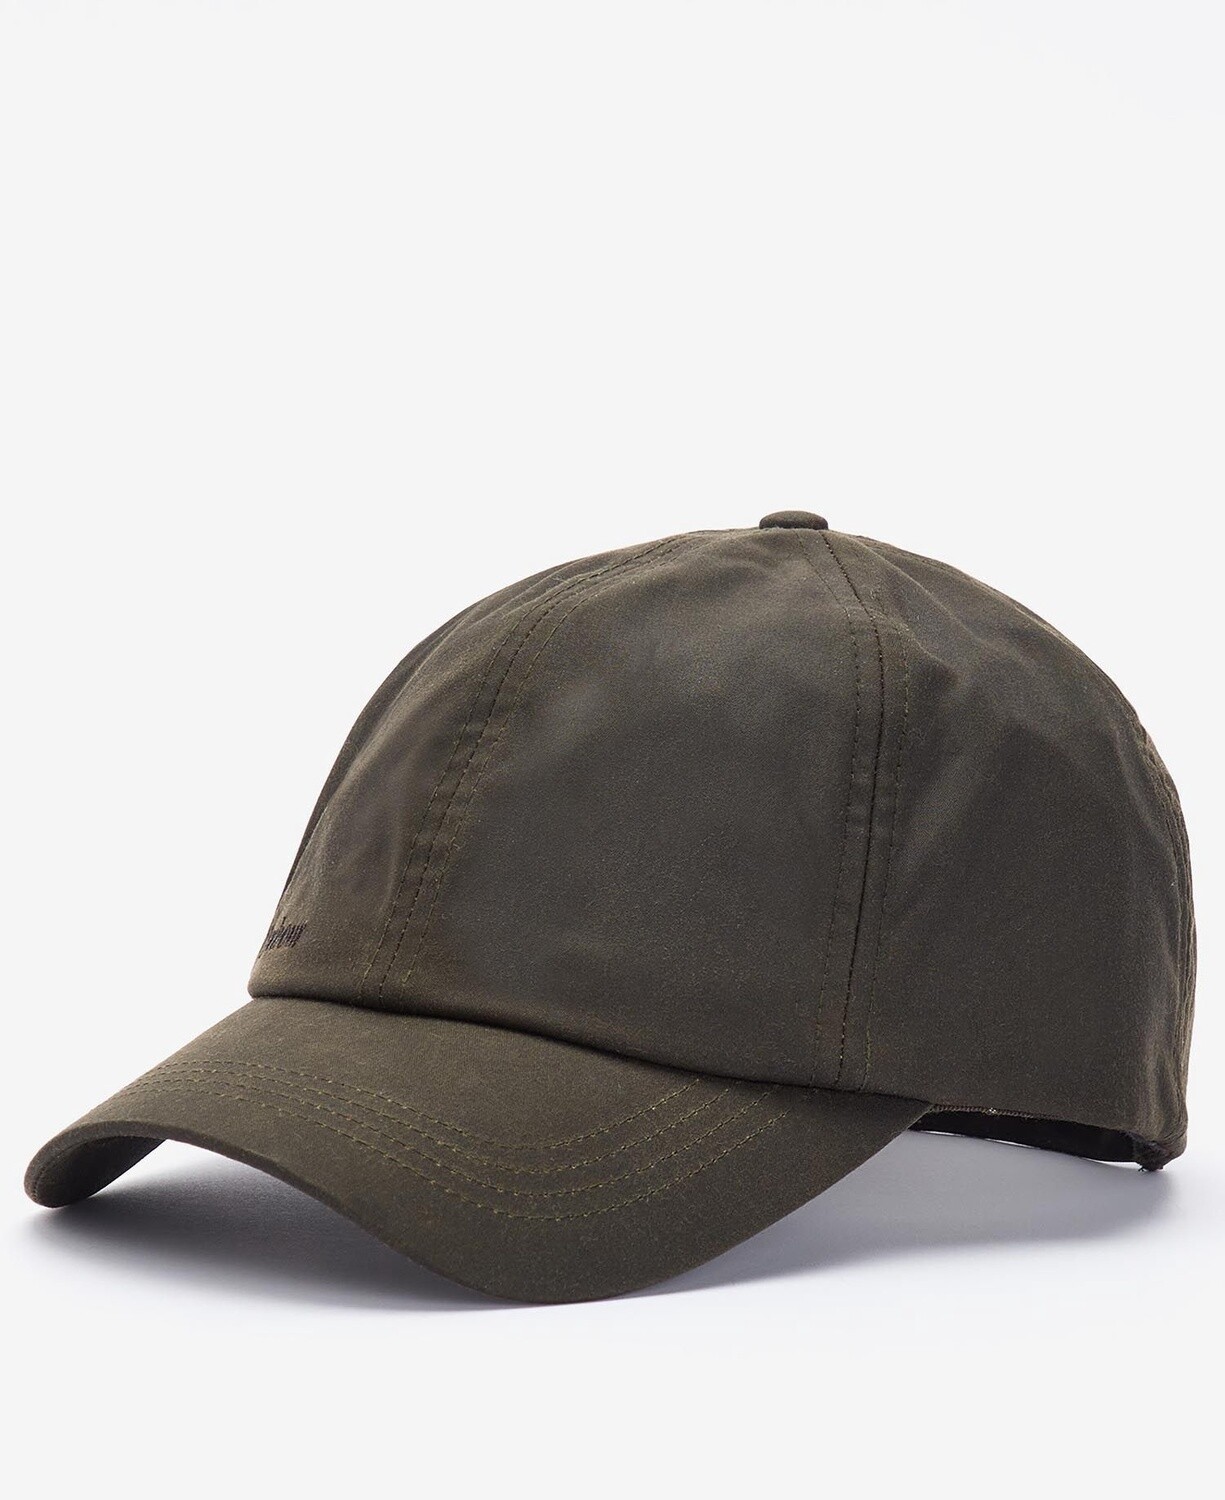 Barbour Waxed Baseball Cap - Olive